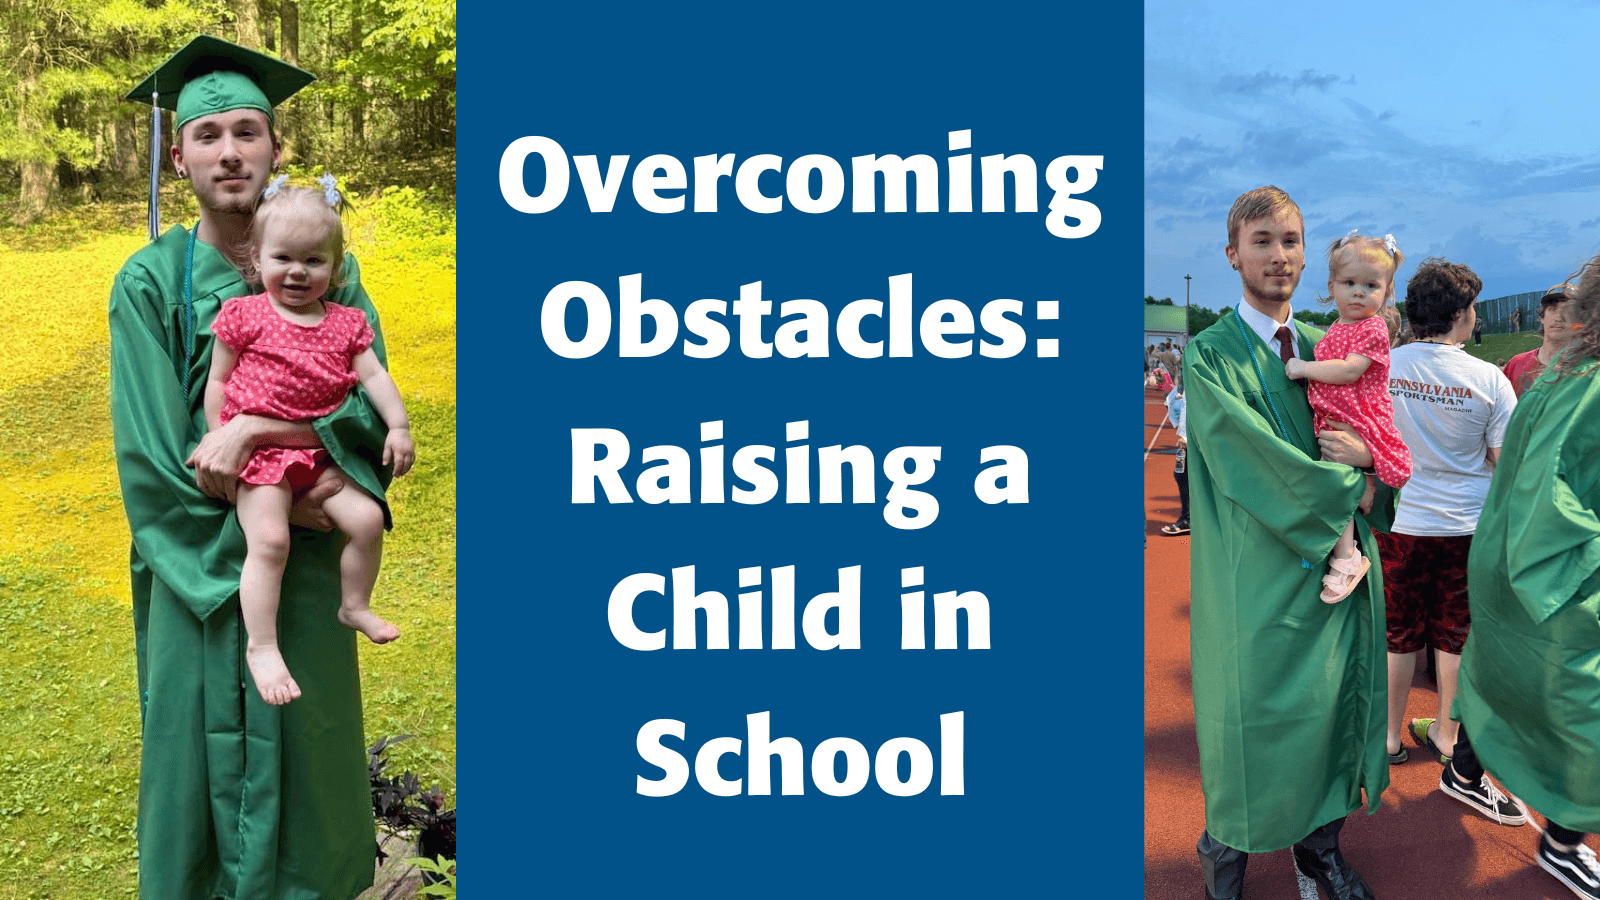 Overcoming Obstacles: Raising a Child in School